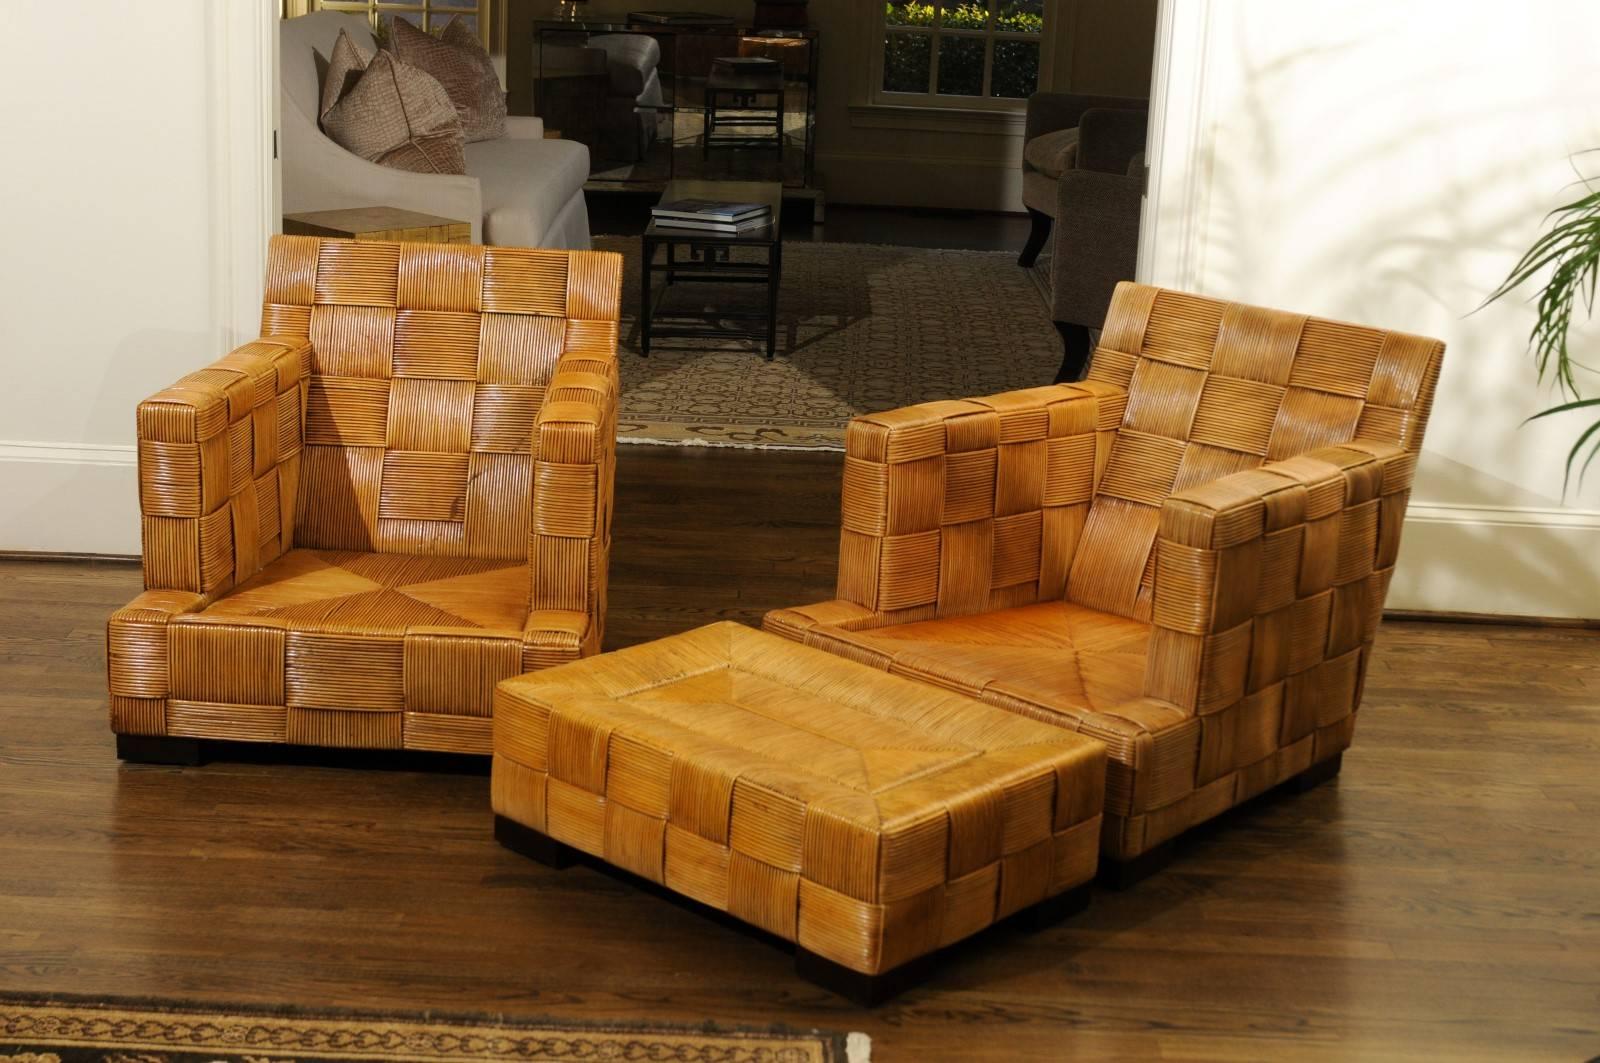 Late 20th Century Stunning Pair of Block Island Club Chairs by John Hutton for Donghia